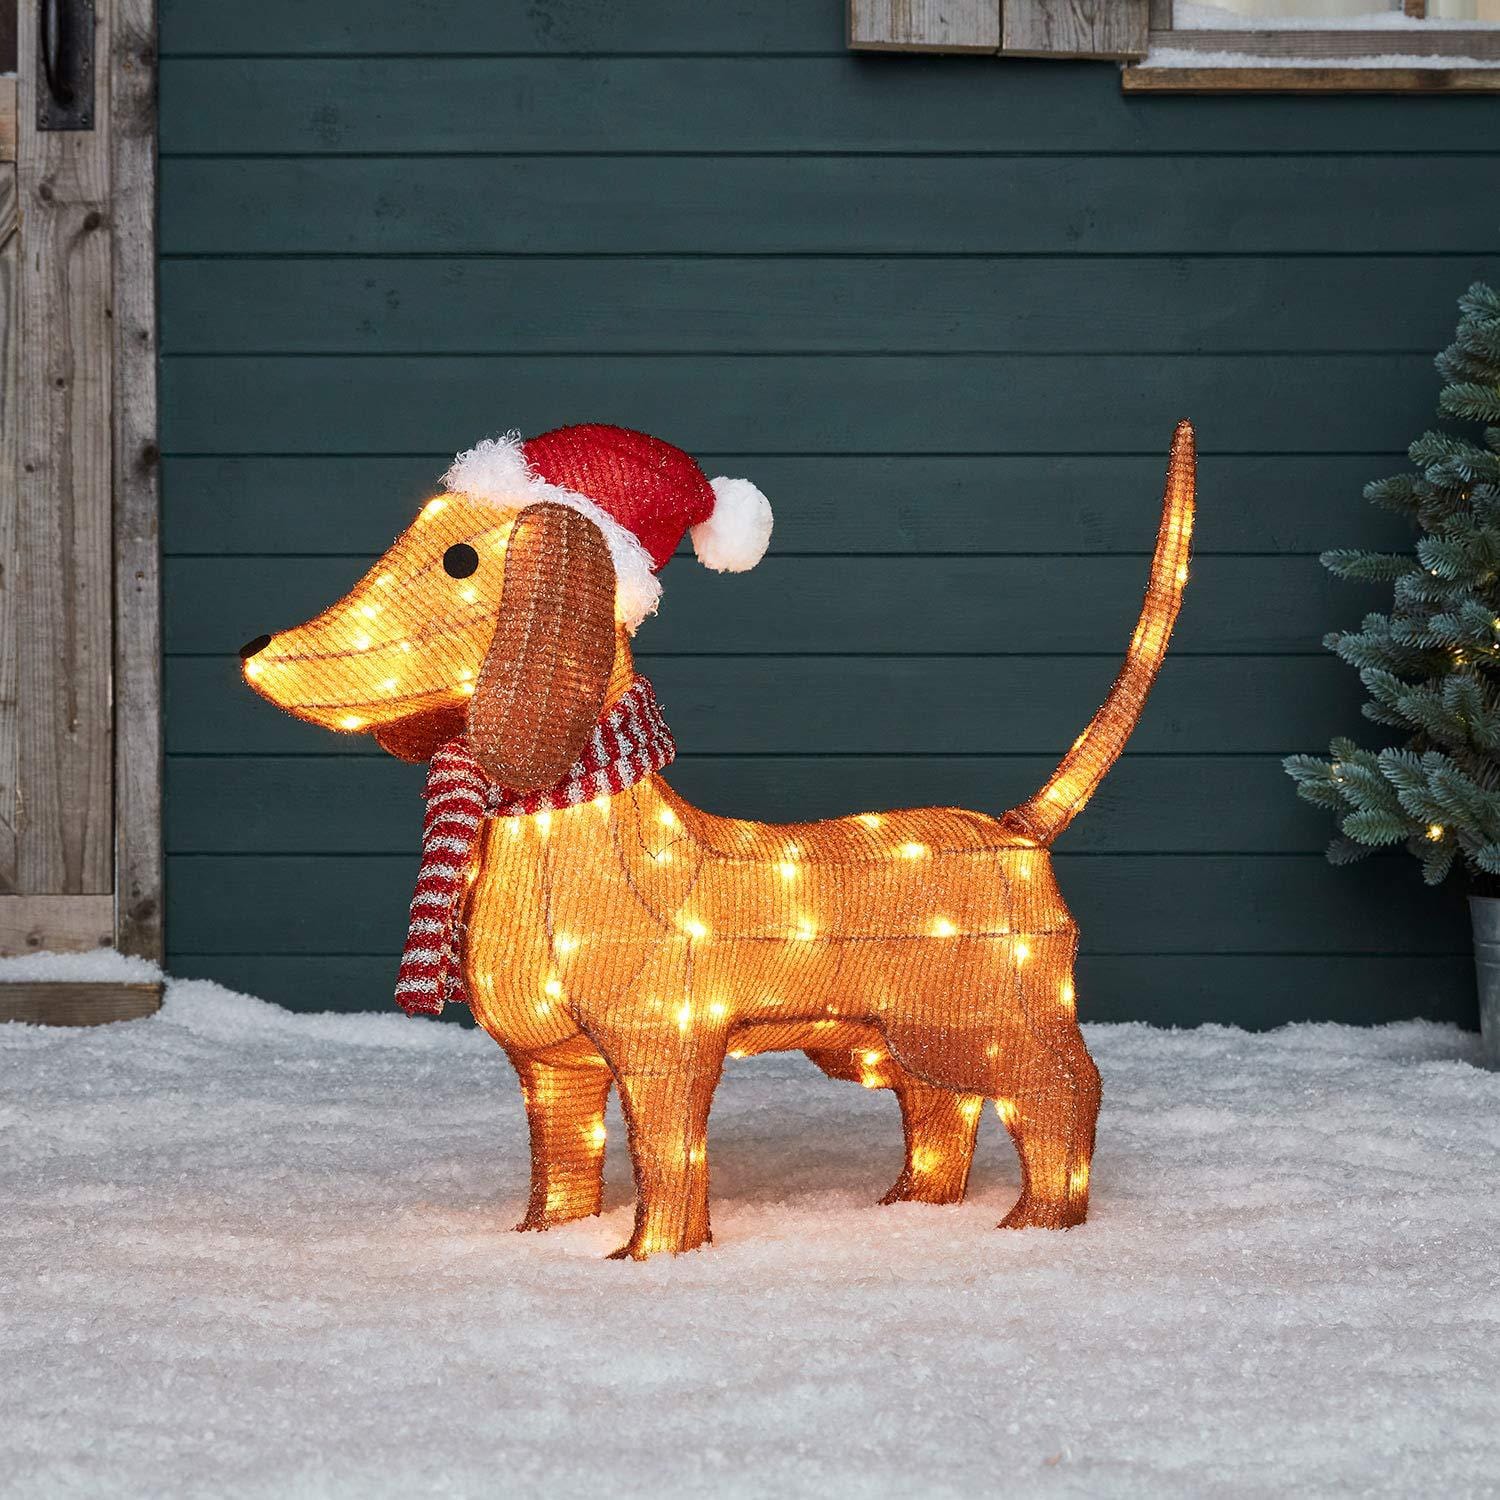 Dachshund Christmas Lights | The Doxie World